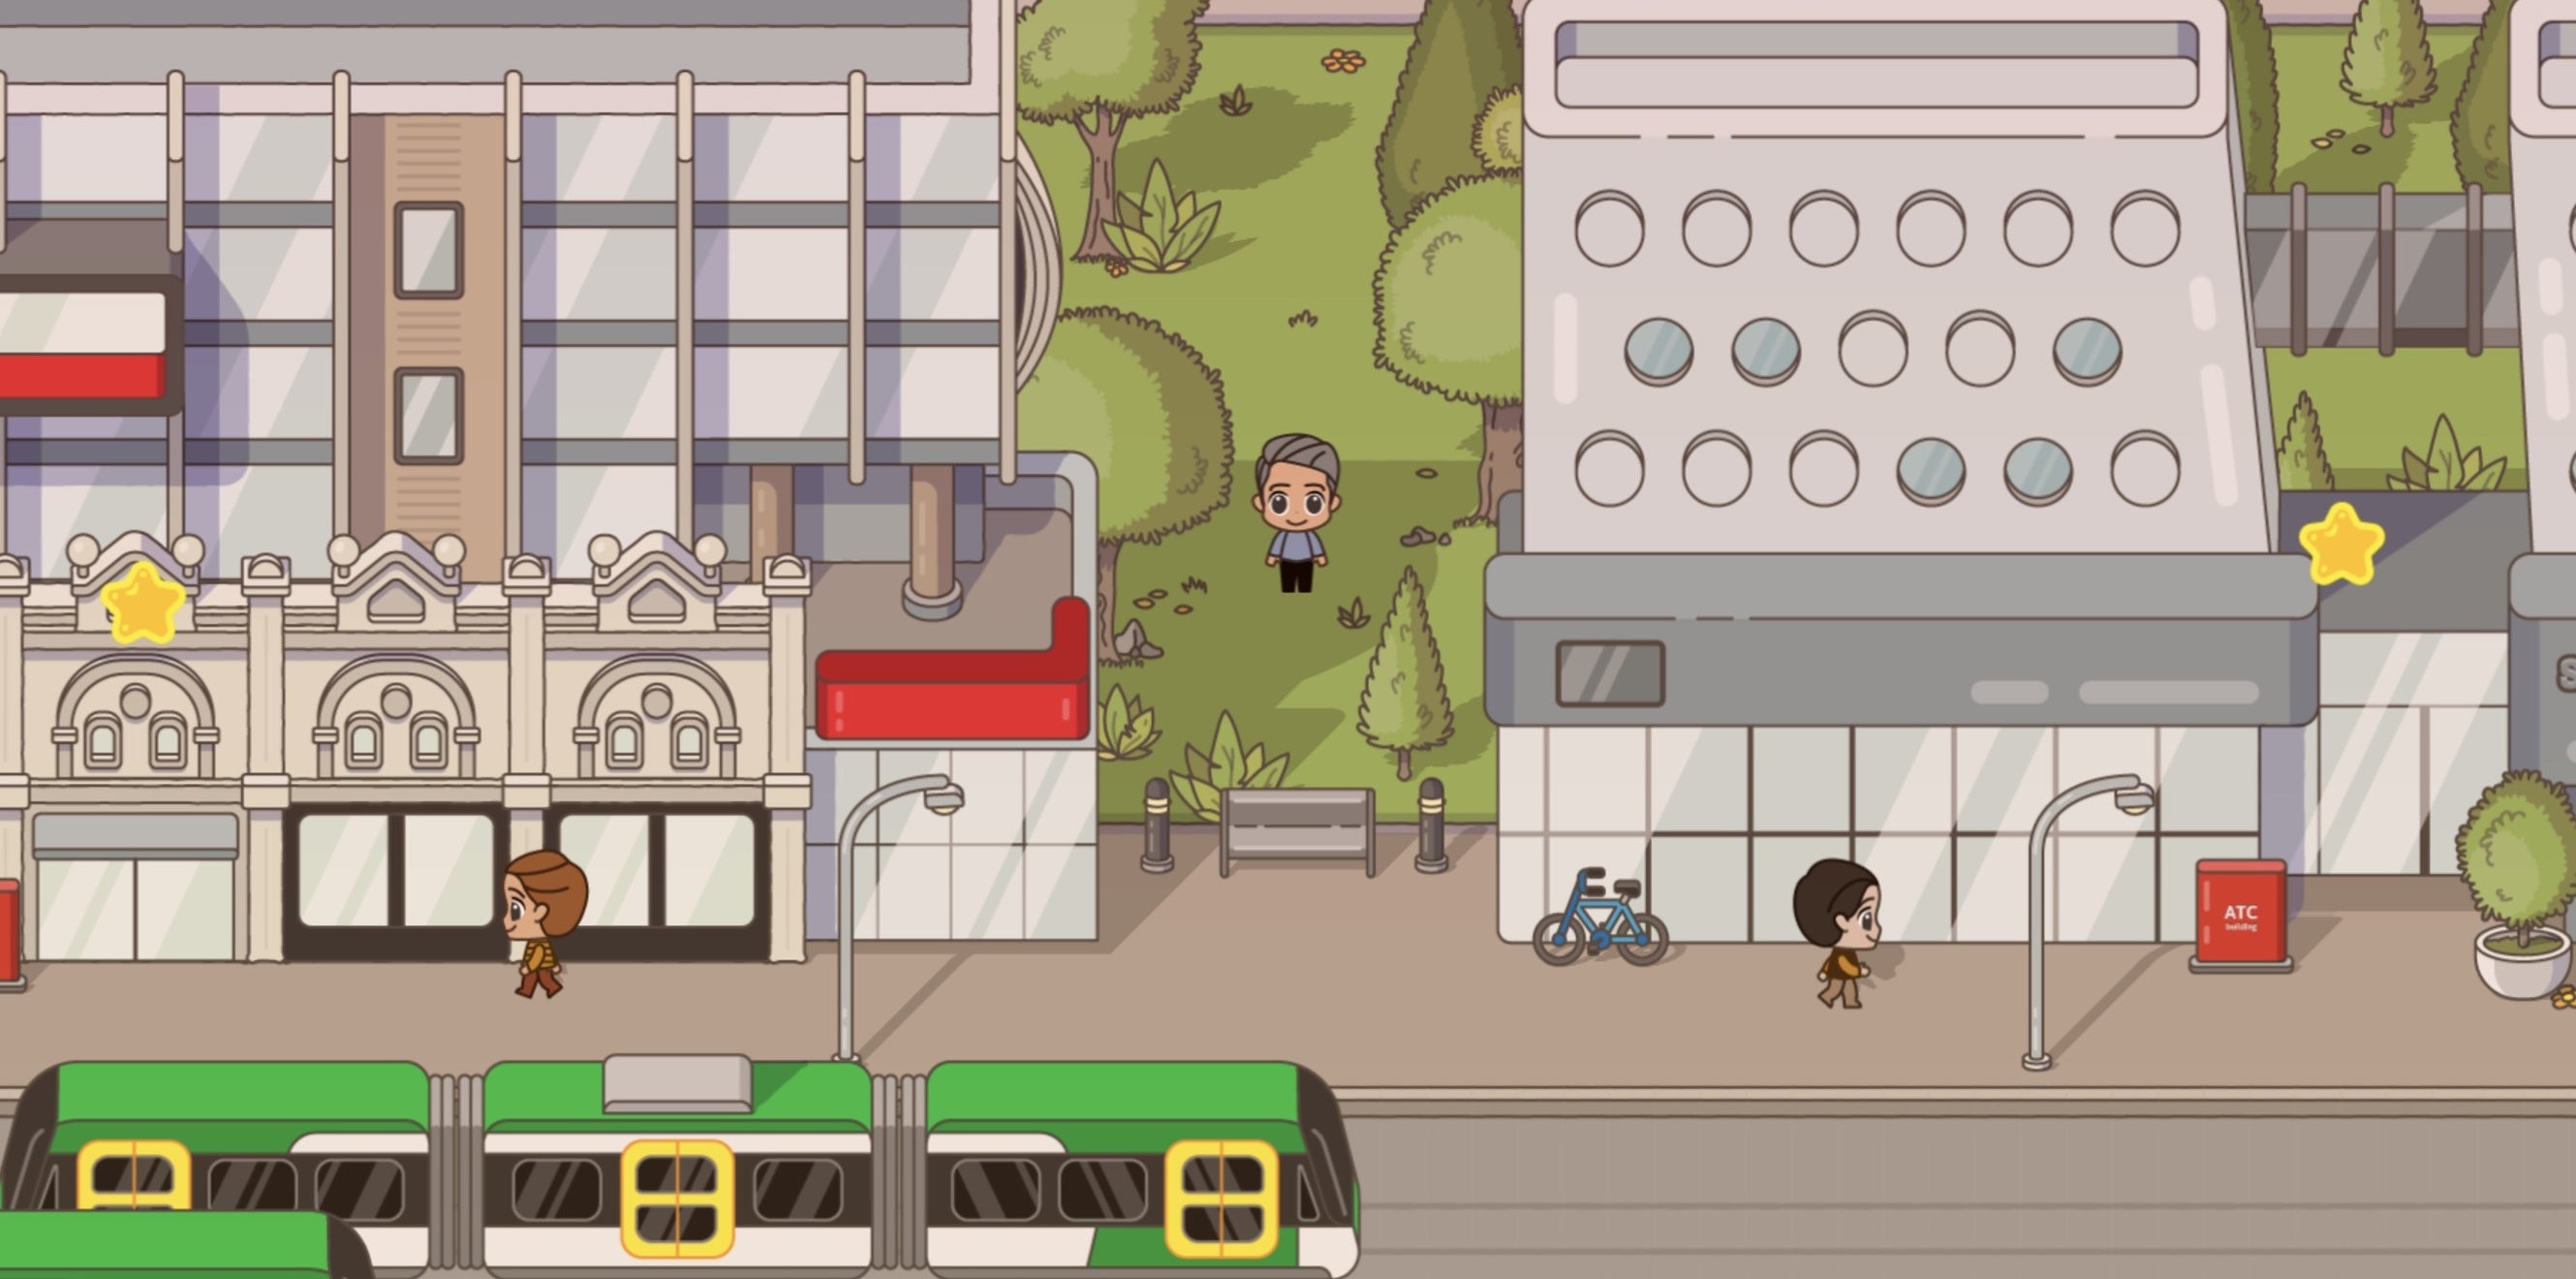 Image of Swintopia with a focus on the animated train and characters walking on a pathway